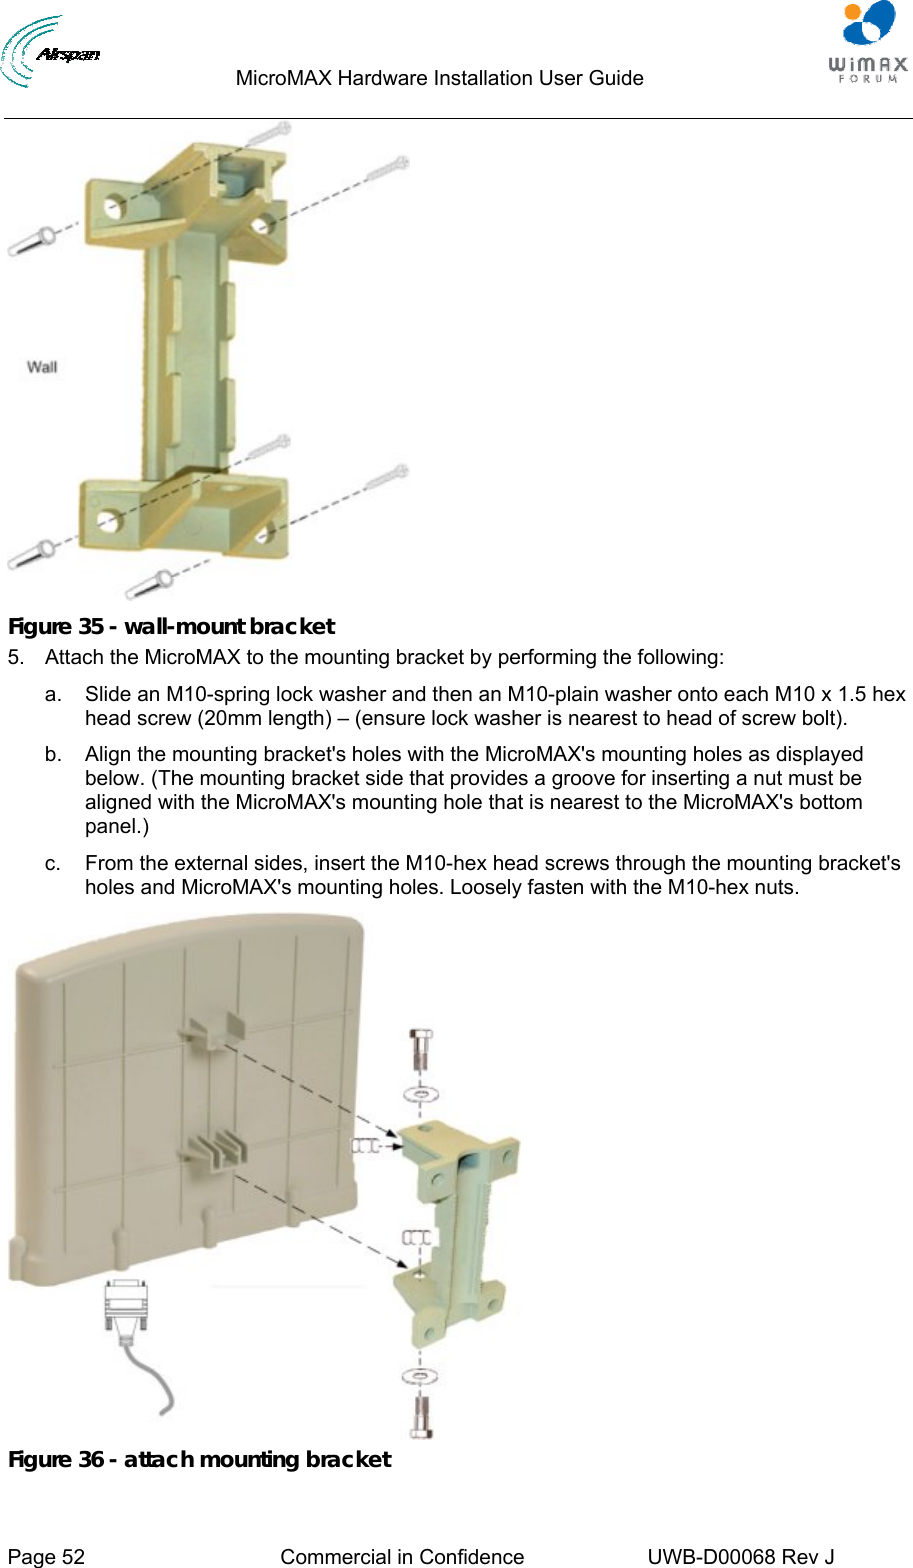                                  MicroMAX Hardware Installation User Guide     Page 52  Commercial in Confidence  UWB-D00068 Rev J    Figure 35 - wall-mount bracket 5.  Attach the MicroMAX to the mounting bracket by performing the following: a.  Slide an M10-spring lock washer and then an M10-plain washer onto each M10 x 1.5 hex head screw (20mm length) – (ensure lock washer is nearest to head of screw bolt). b.  Align the mounting bracket&apos;s holes with the MicroMAX&apos;s mounting holes as displayed below. (The mounting bracket side that provides a groove for inserting a nut must be aligned with the MicroMAX&apos;s mounting hole that is nearest to the MicroMAX&apos;s bottom panel.) c.  From the external sides, insert the M10-hex head screws through the mounting bracket&apos;s holes and MicroMAX&apos;s mounting holes. Loosely fasten with the M10-hex nuts.  Figure 36 - attach mounting bracket 